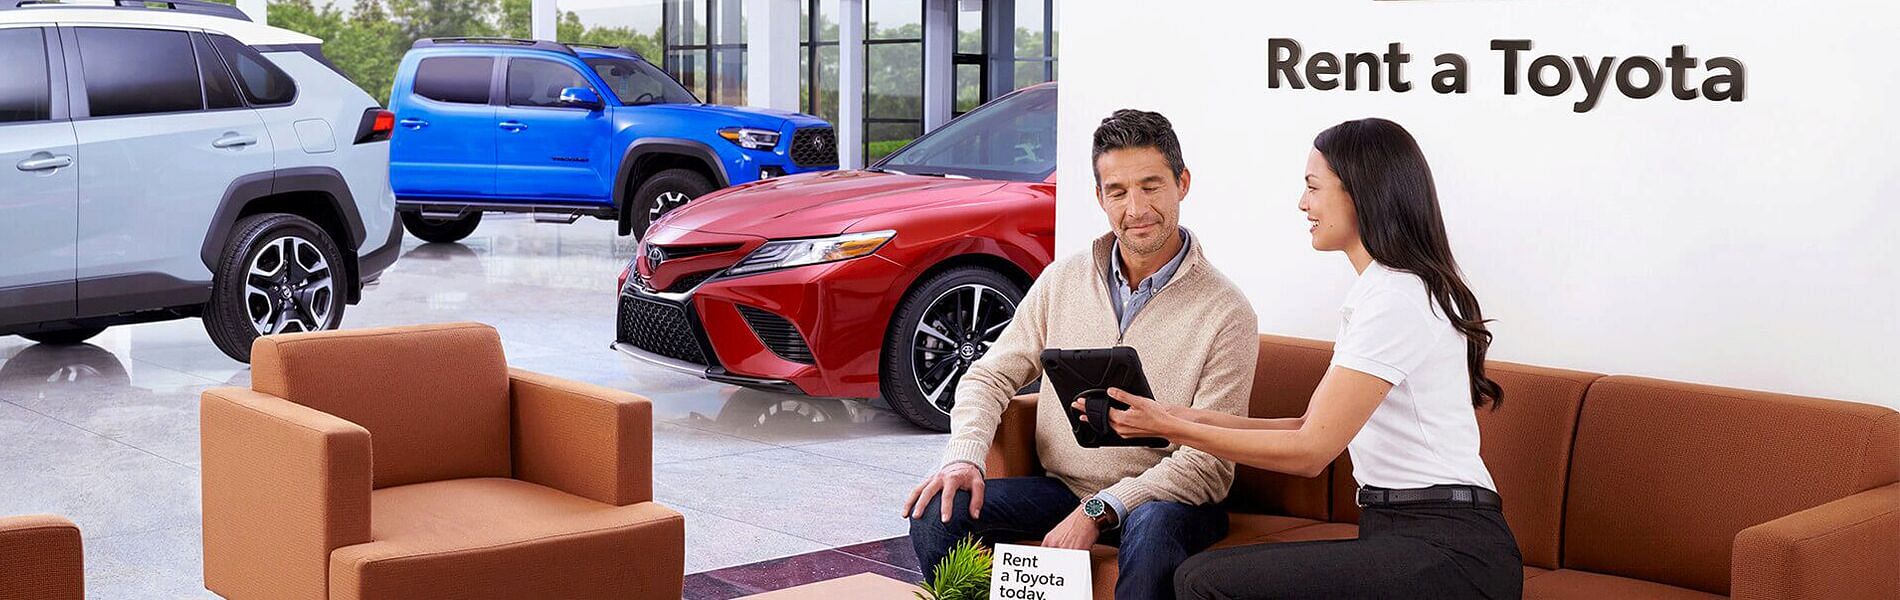 Woman shows man cars for rent sitting in car showroom